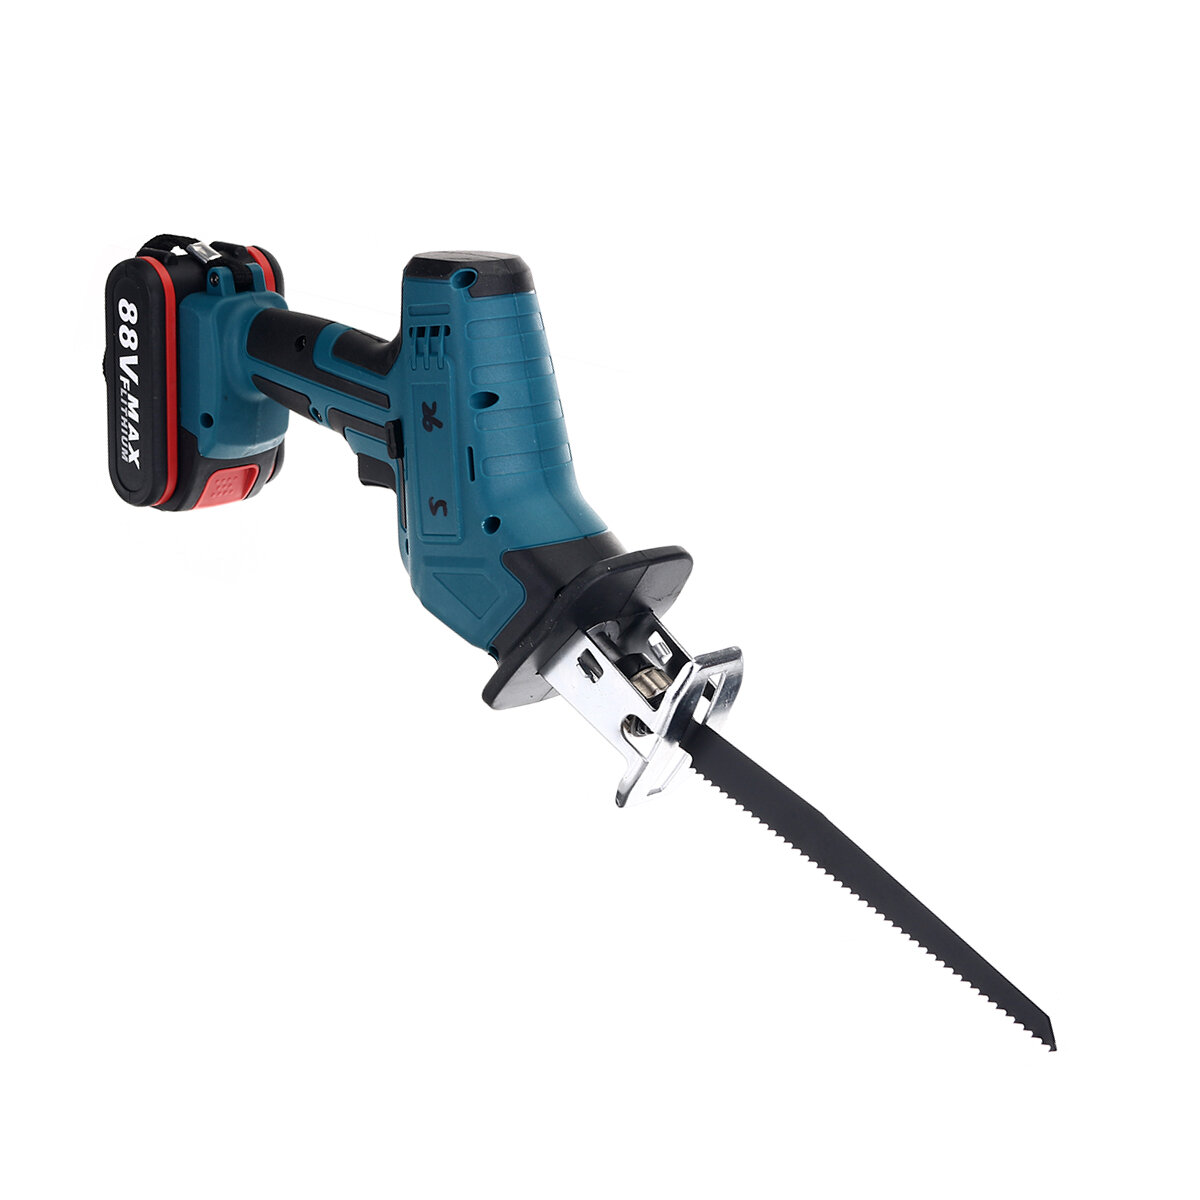 Cordless Reciprocating Saw With 4 Blades & Battery Rechargeable Electric Saw for Sawing Branches Metal PVC Wood COD